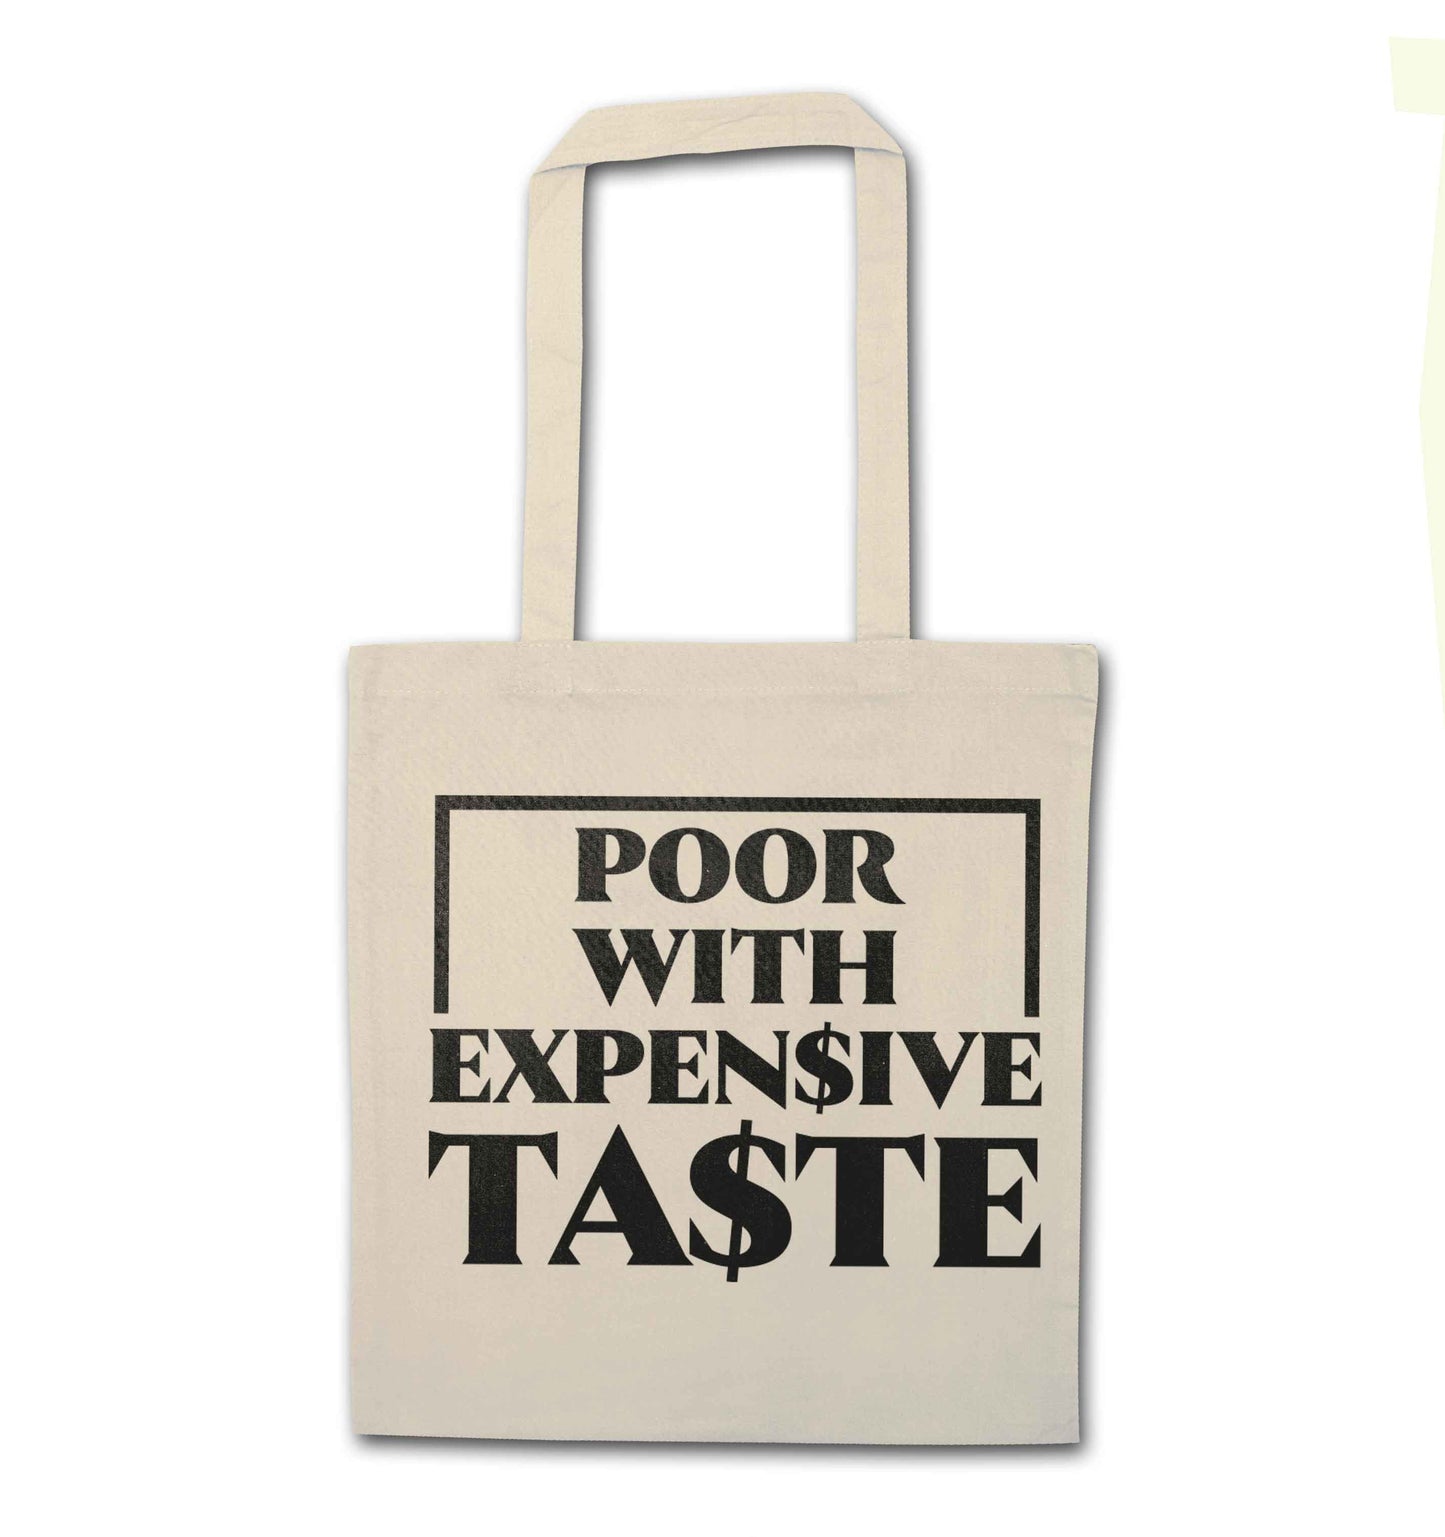 Poor with expensive taste natural tote bag